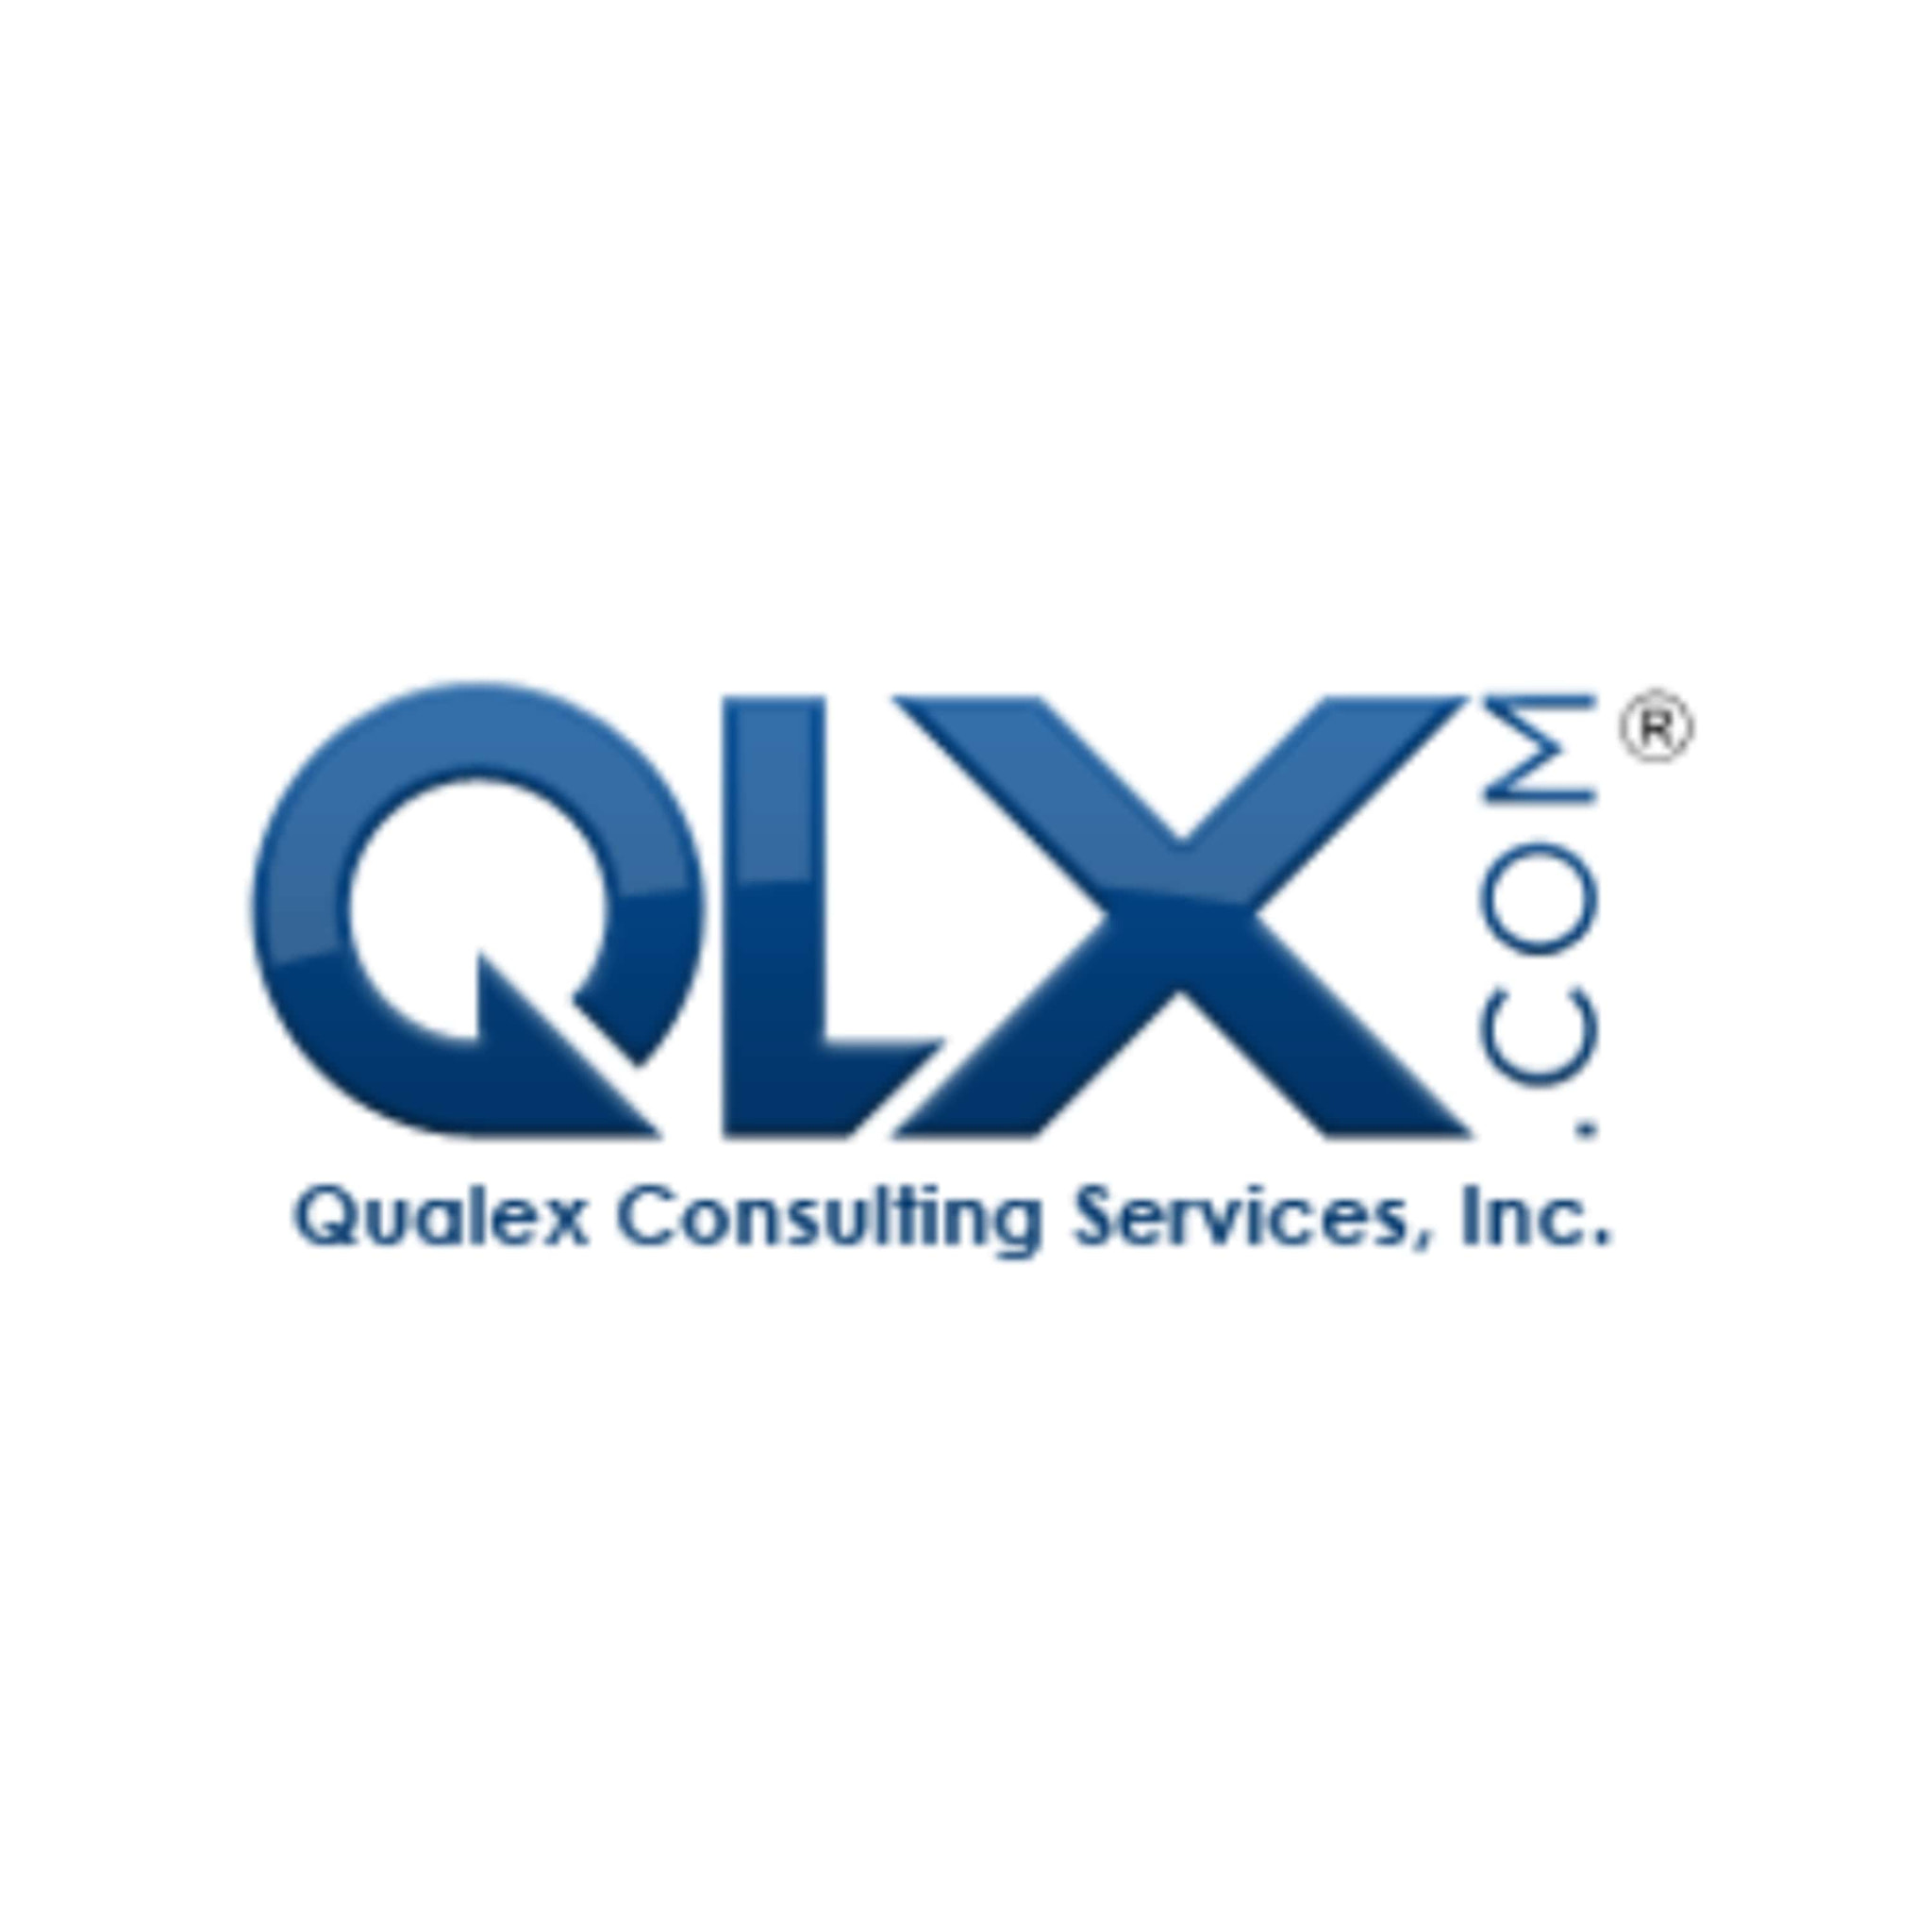 Qualex Consulting Services - Innovative Solutions for Your Business Needs